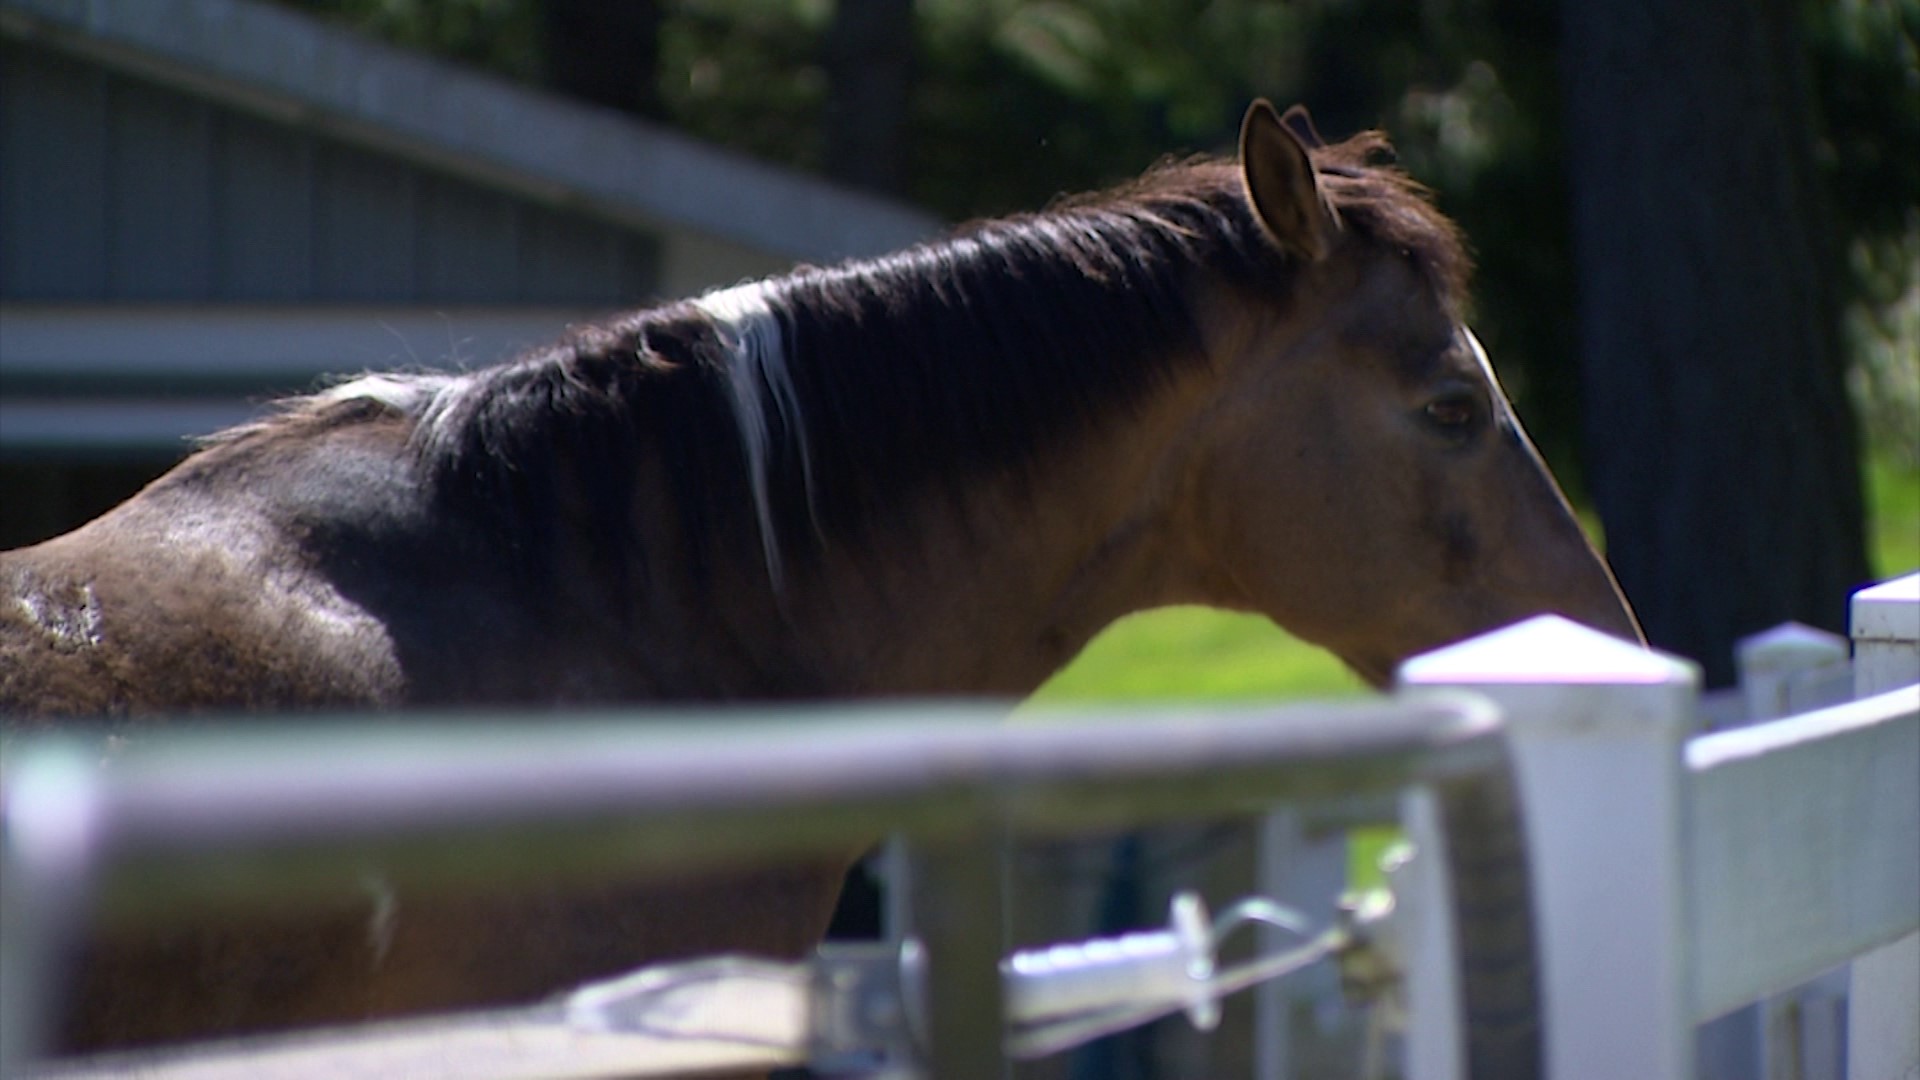 The move comes two years after a horse got stuck in a well in Oak Harbor.